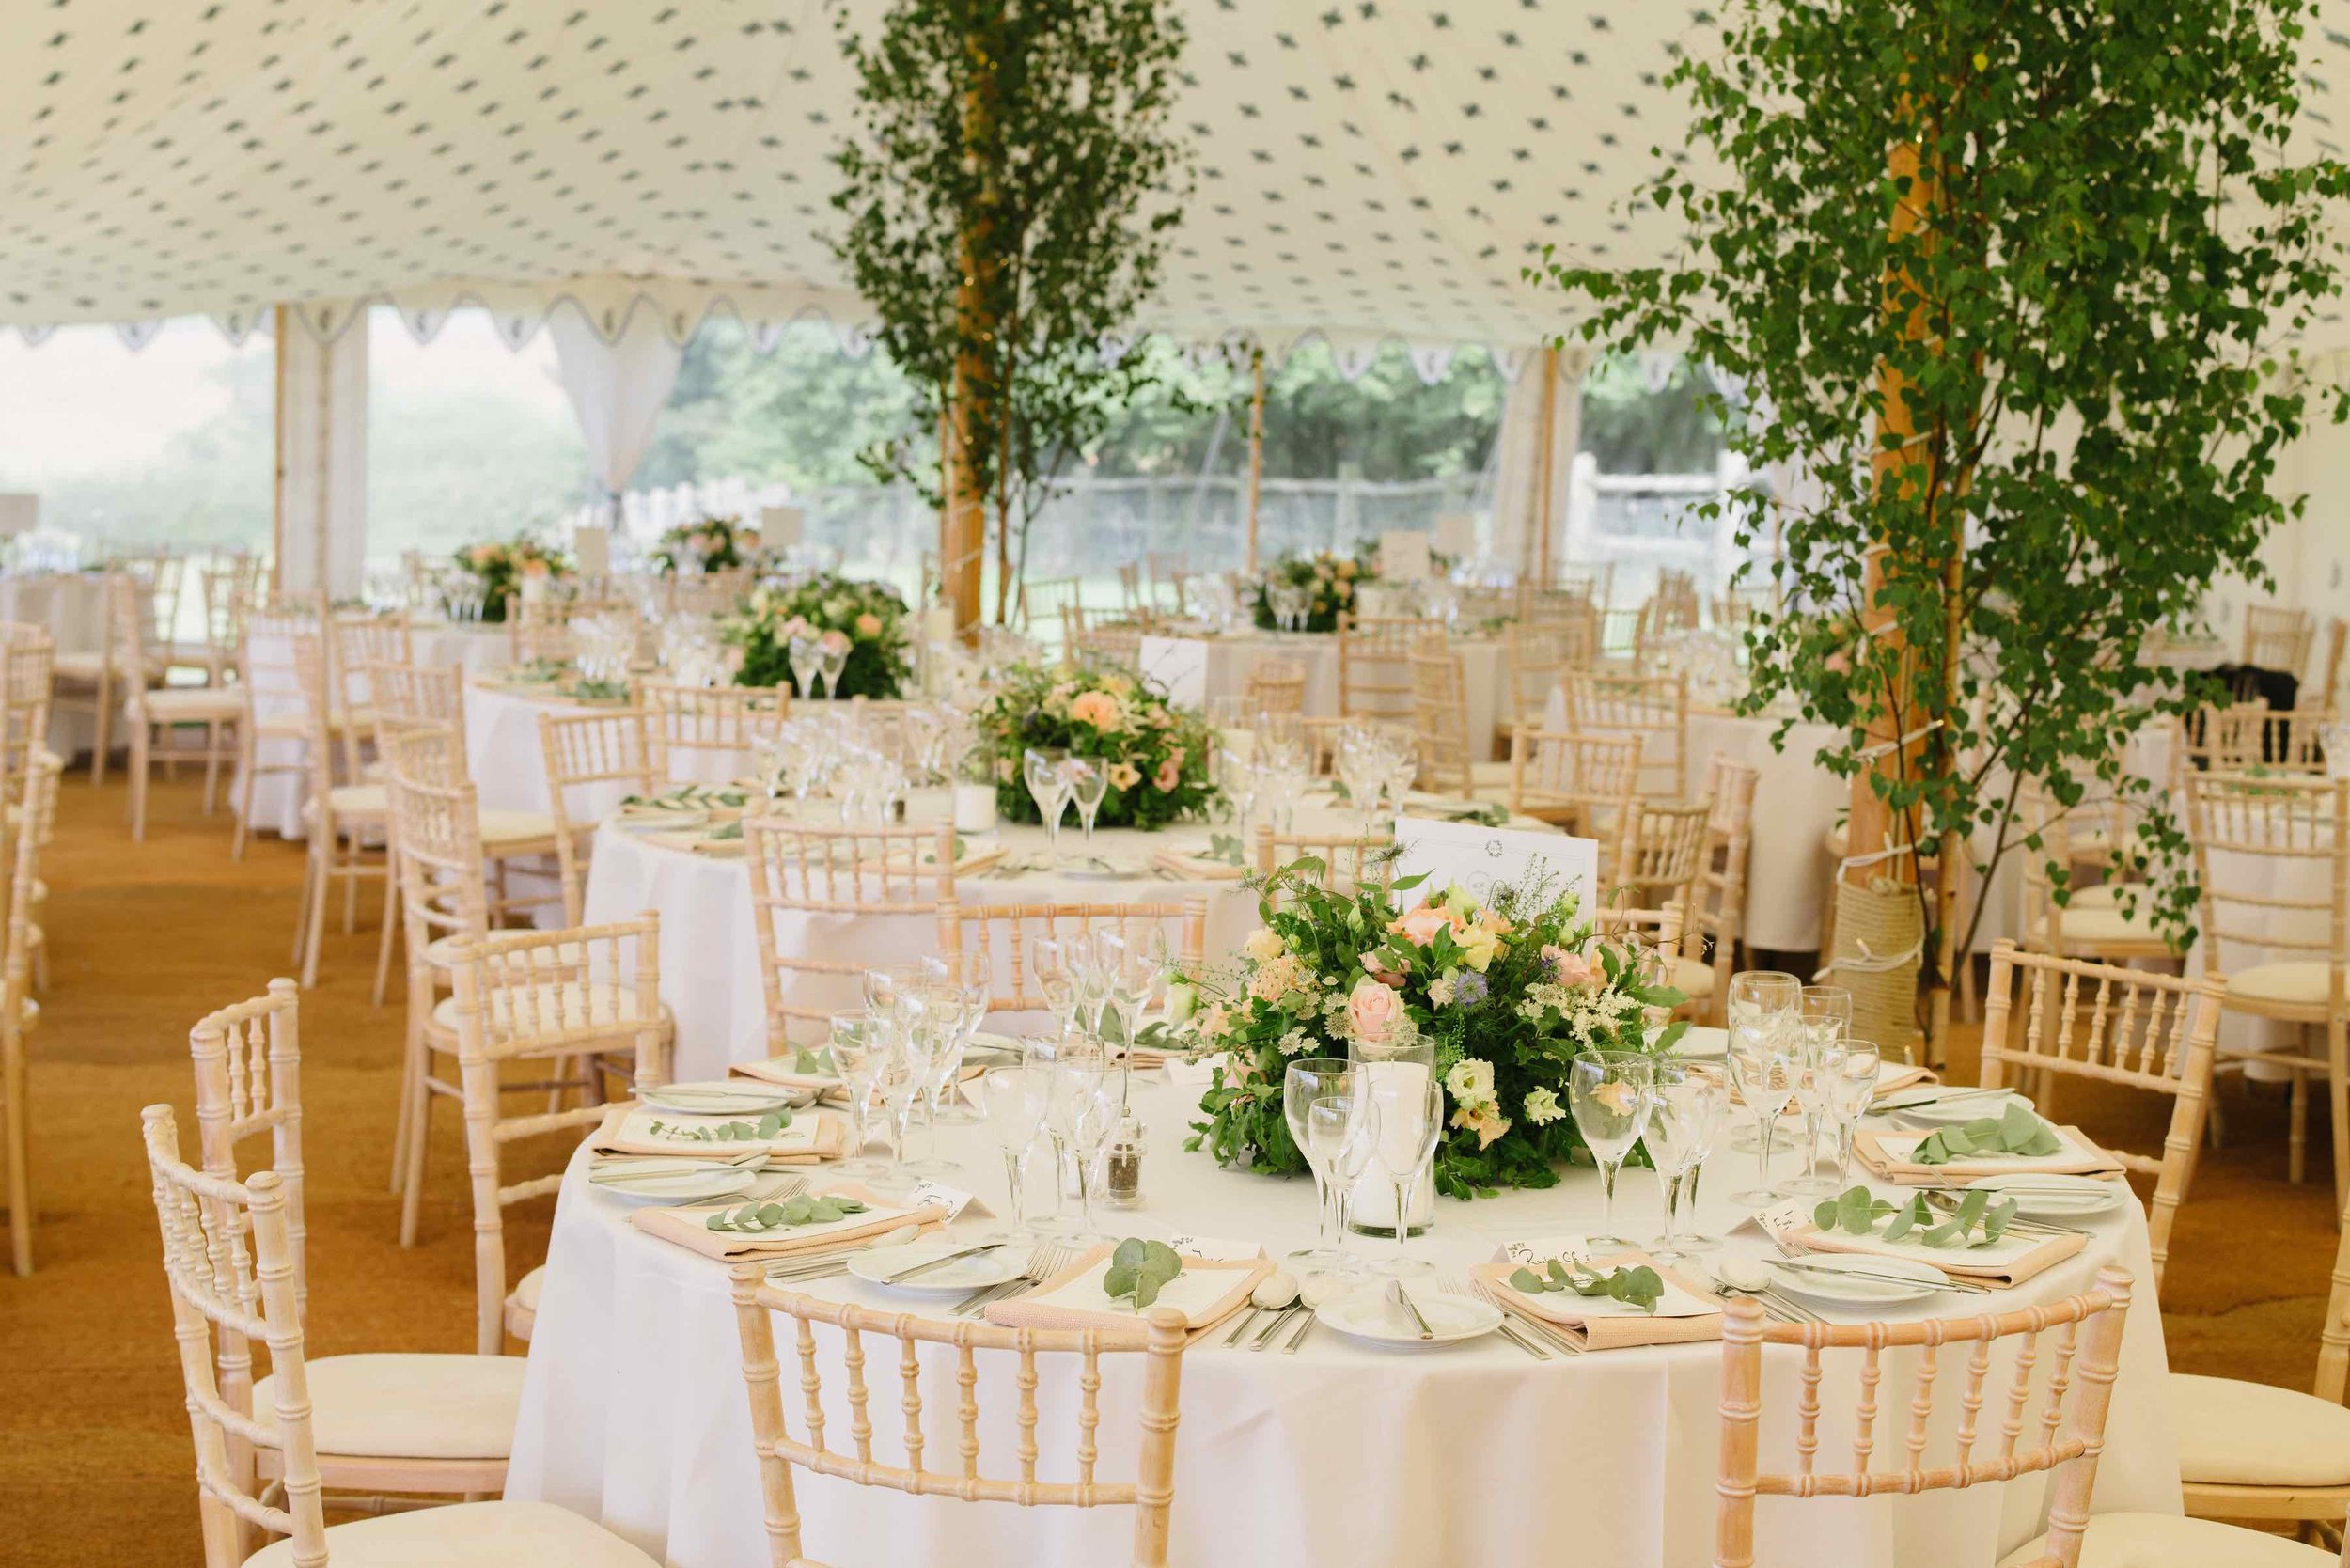 Round Vs Long Dining Tables, How To Set Up Round Tables For A Wedding Reception